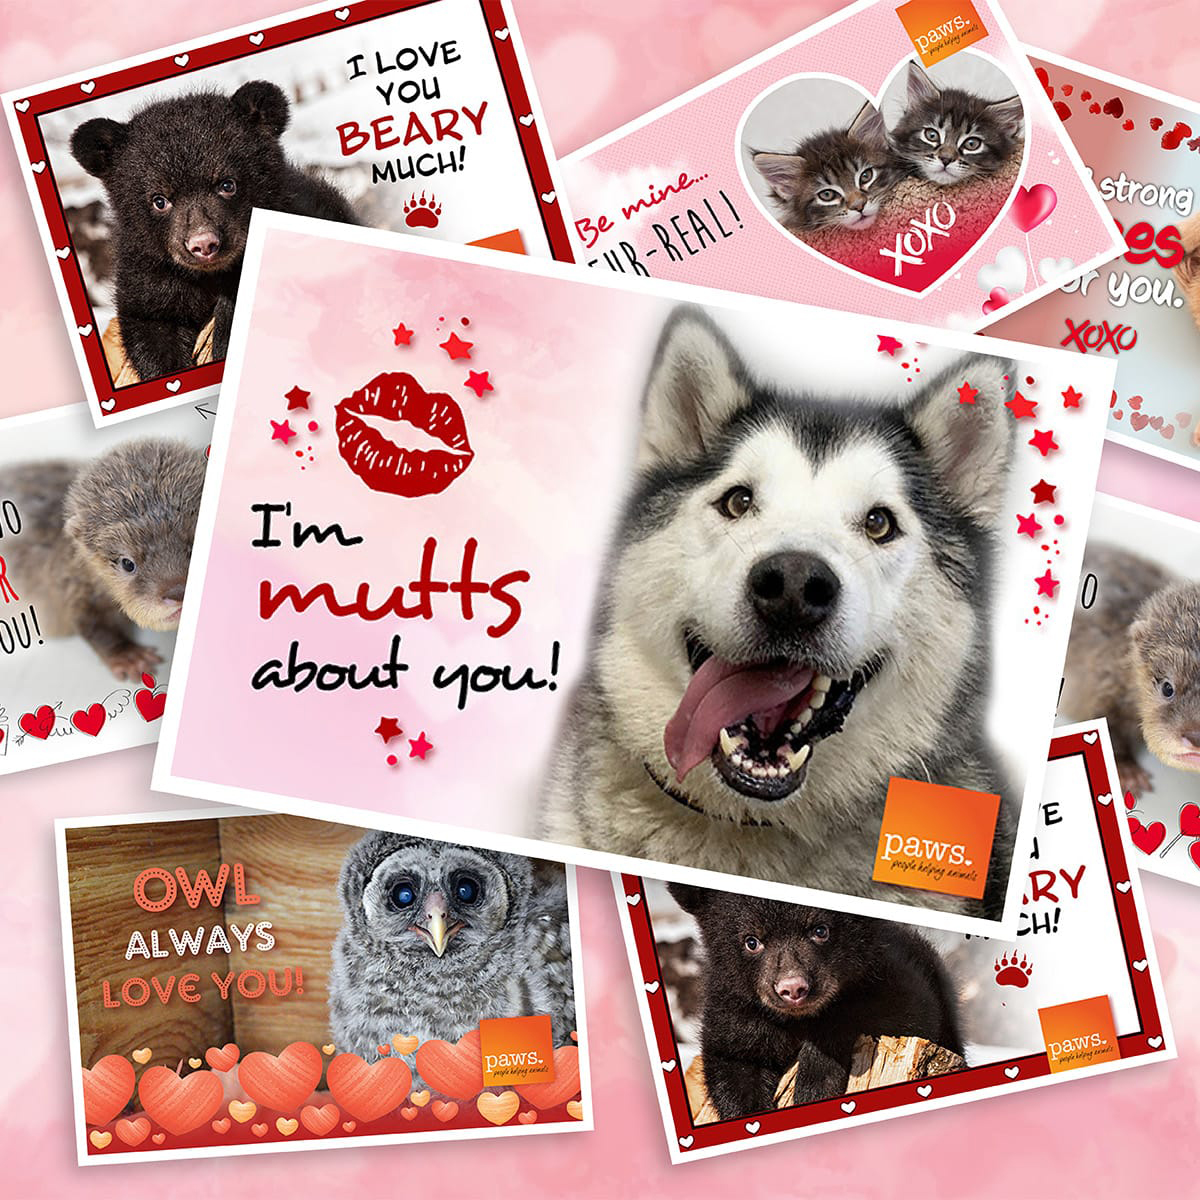 Happy Valentine’s Day from PAWS! 🧡 Spread some love by sending a Valentine's Day e-card to someone special – your gesture will not only warm hearts, but also help an abandoned, orphaned, or injured animal go home and thrive.🐾 Visit paws.org/valentines to send your e-card!